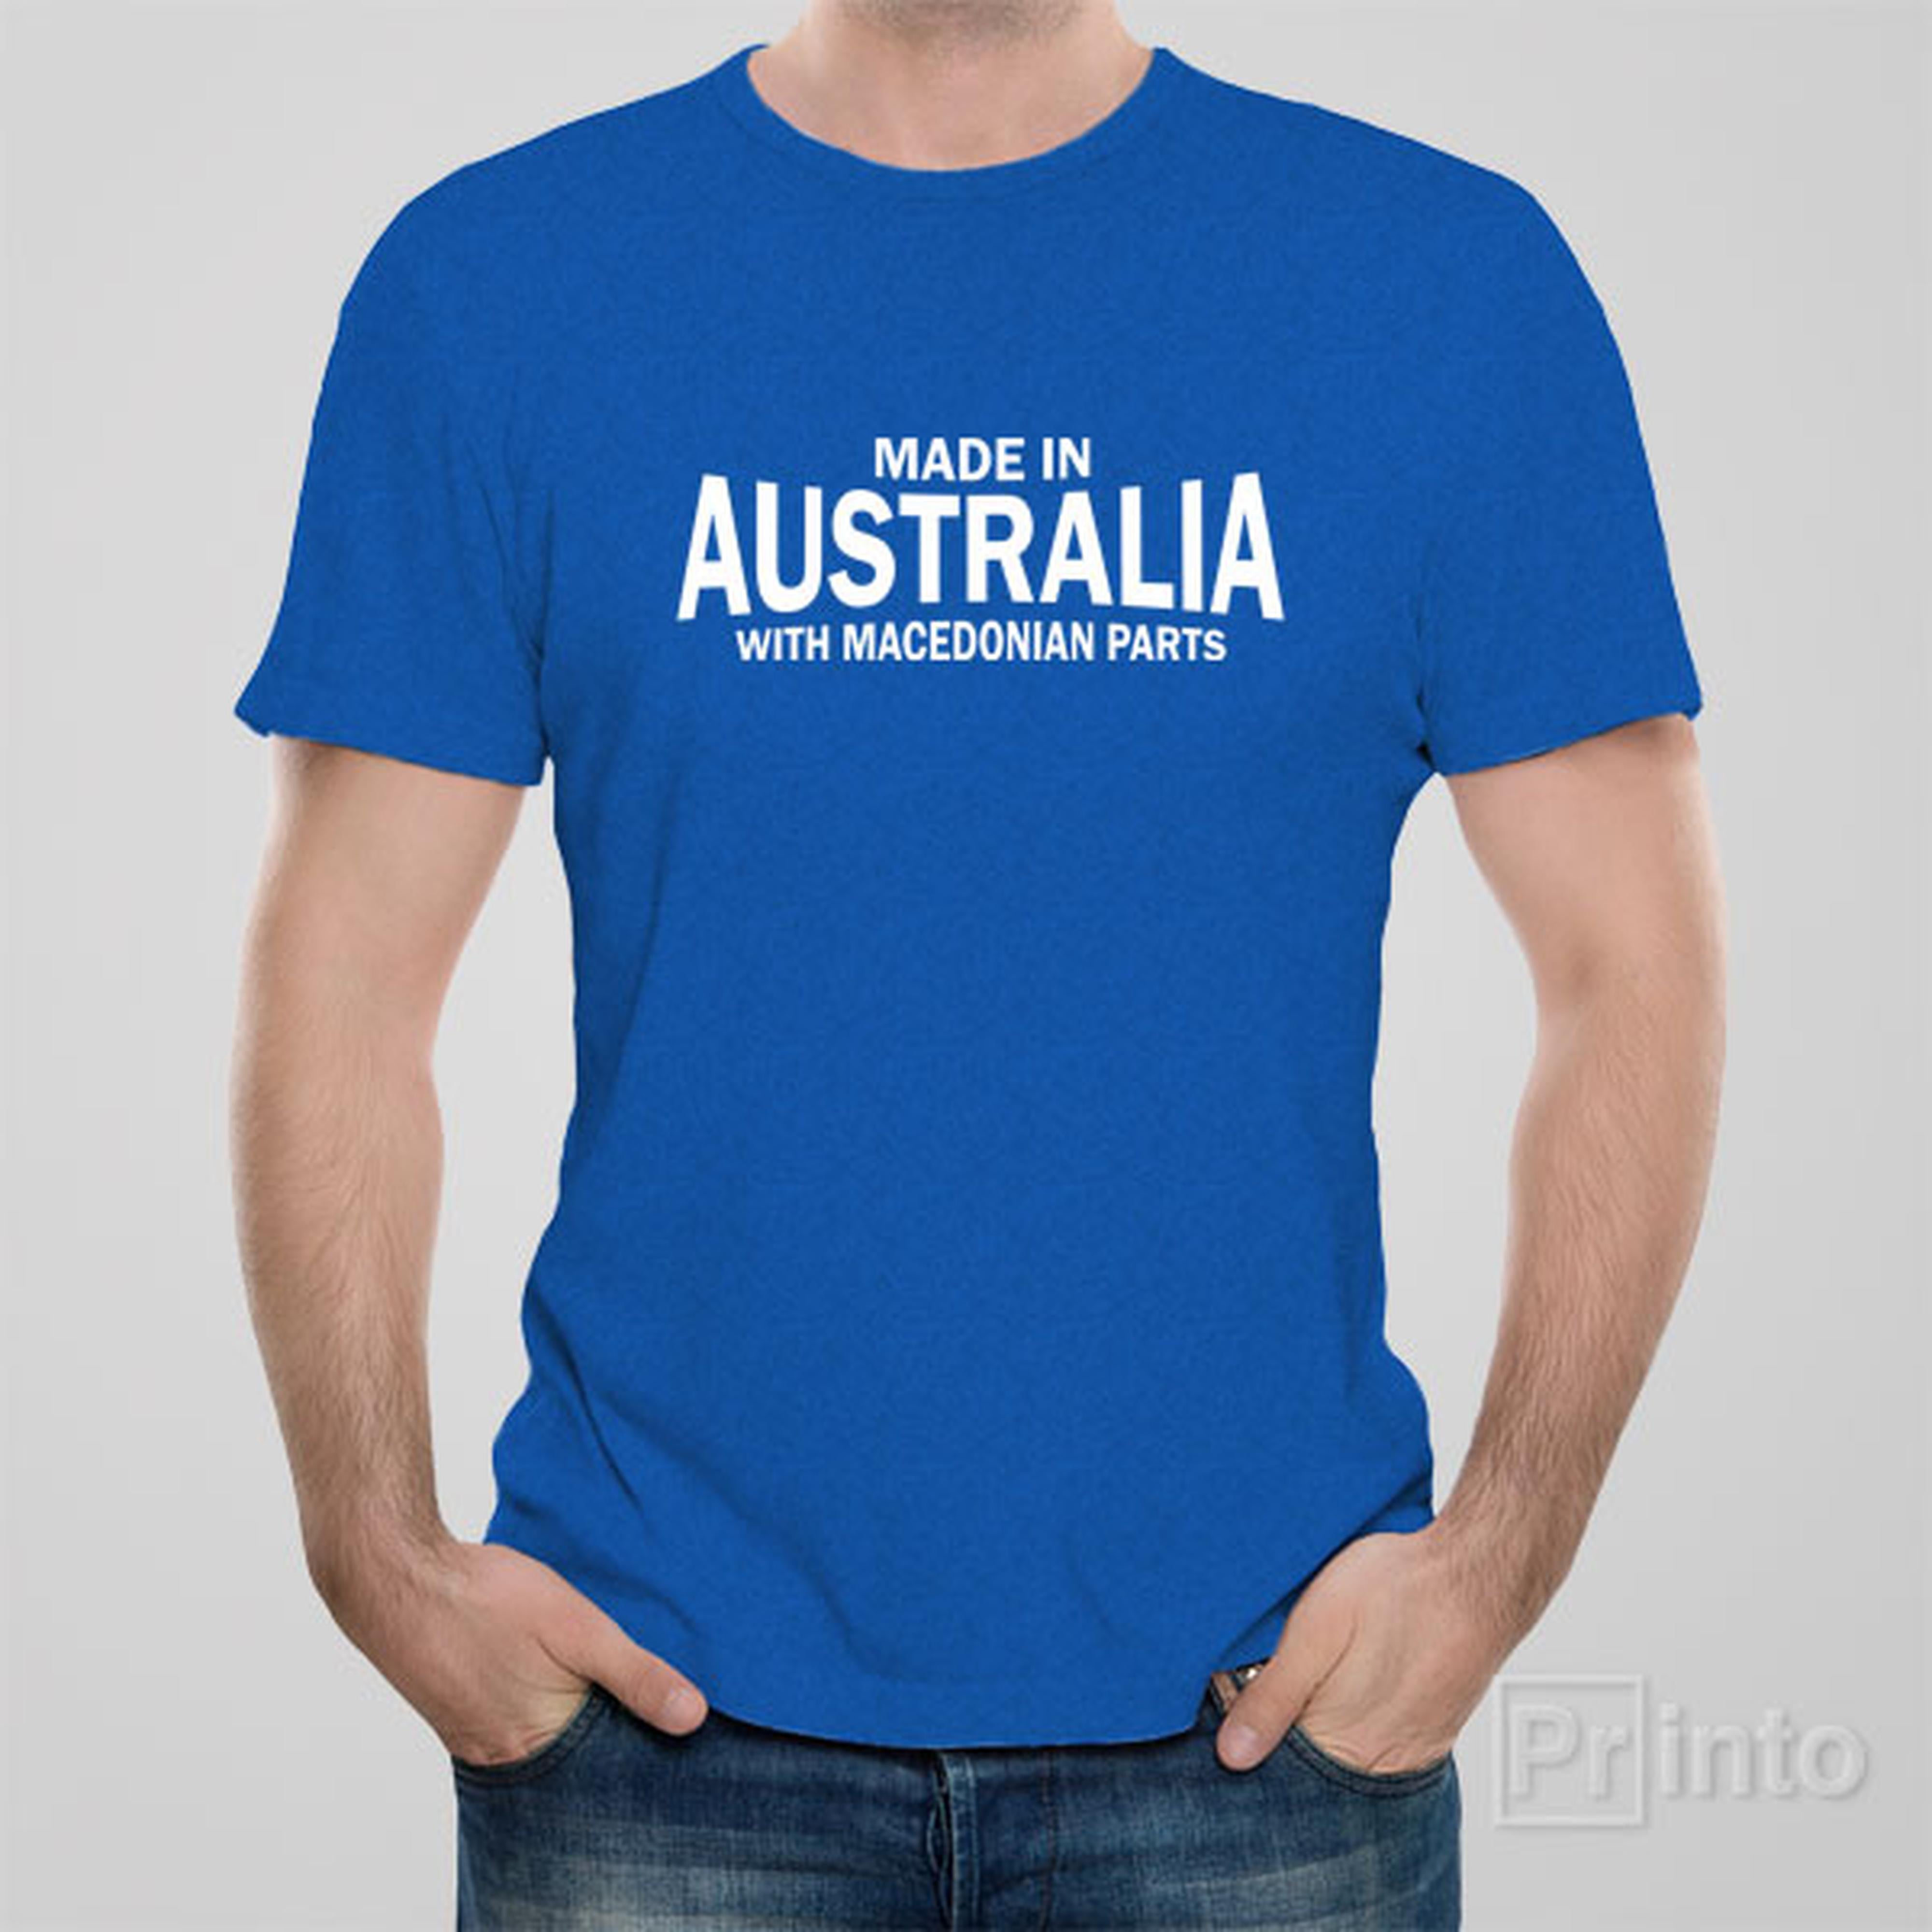 made-in-australia-with-macedonian-parts-t-shirt